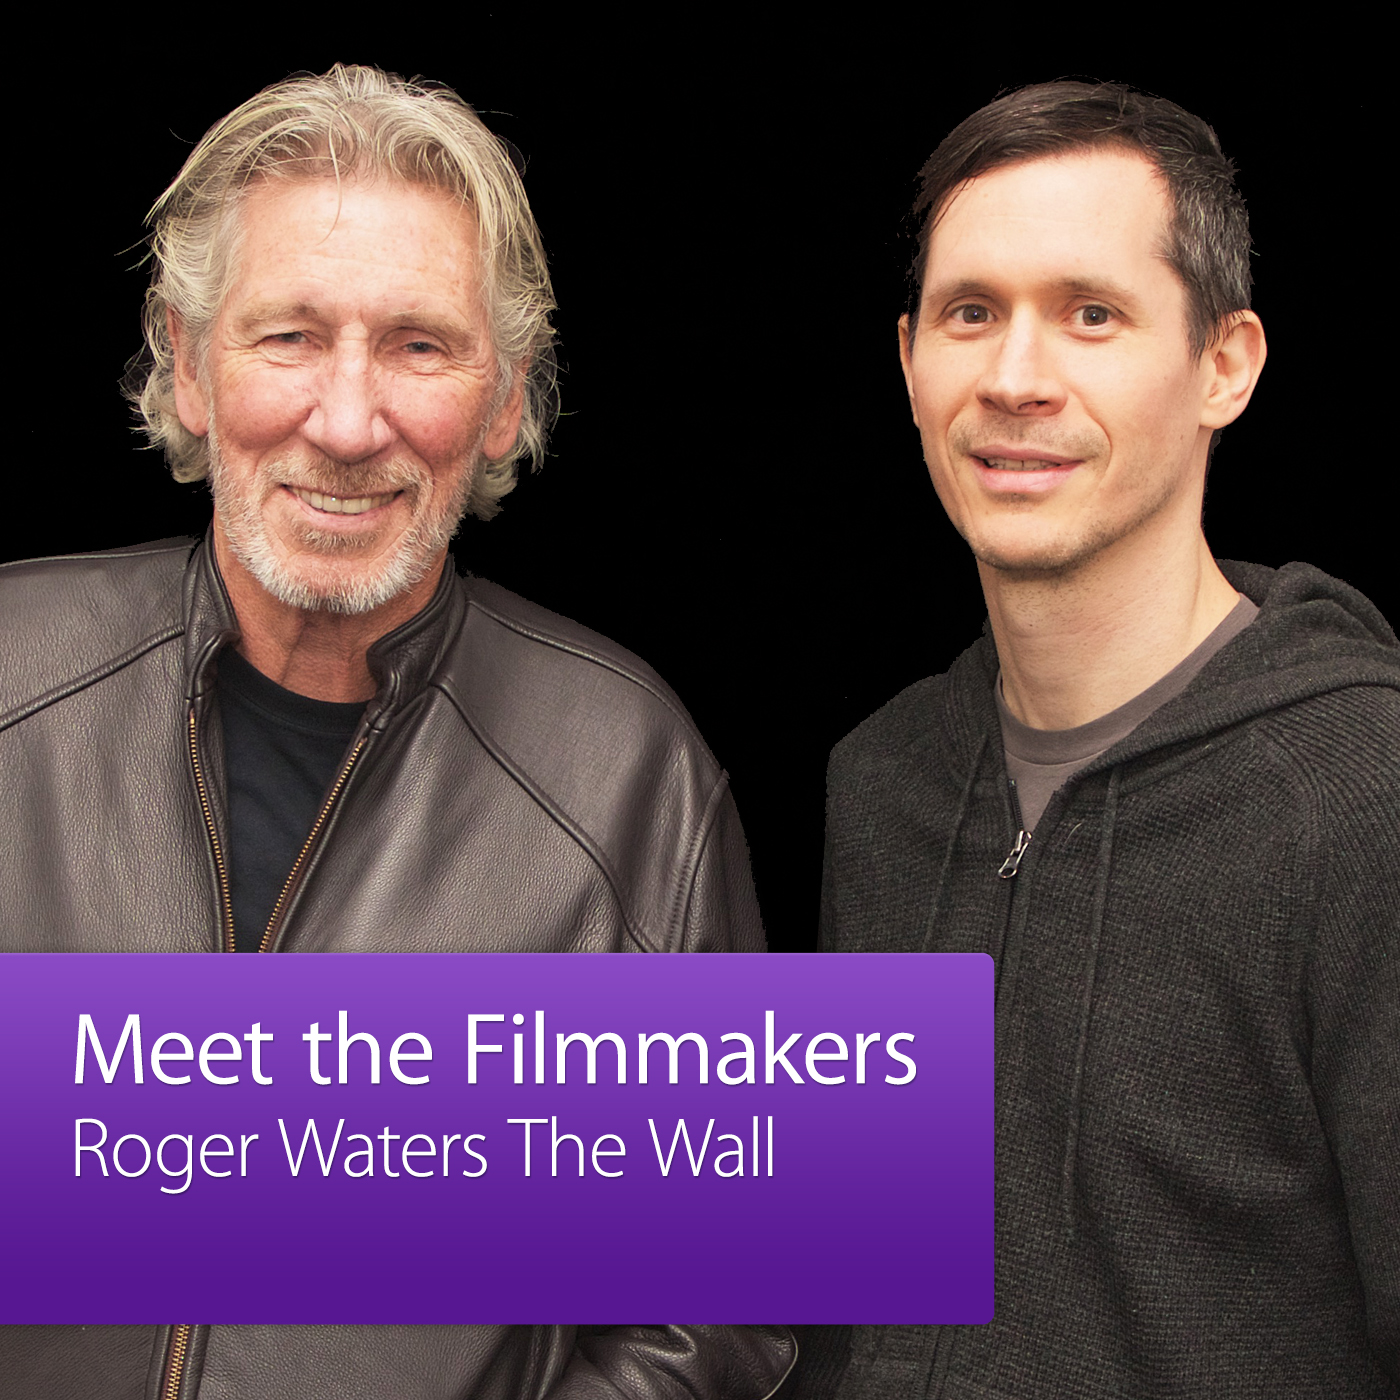 The Wall: Meet the Filmmakers